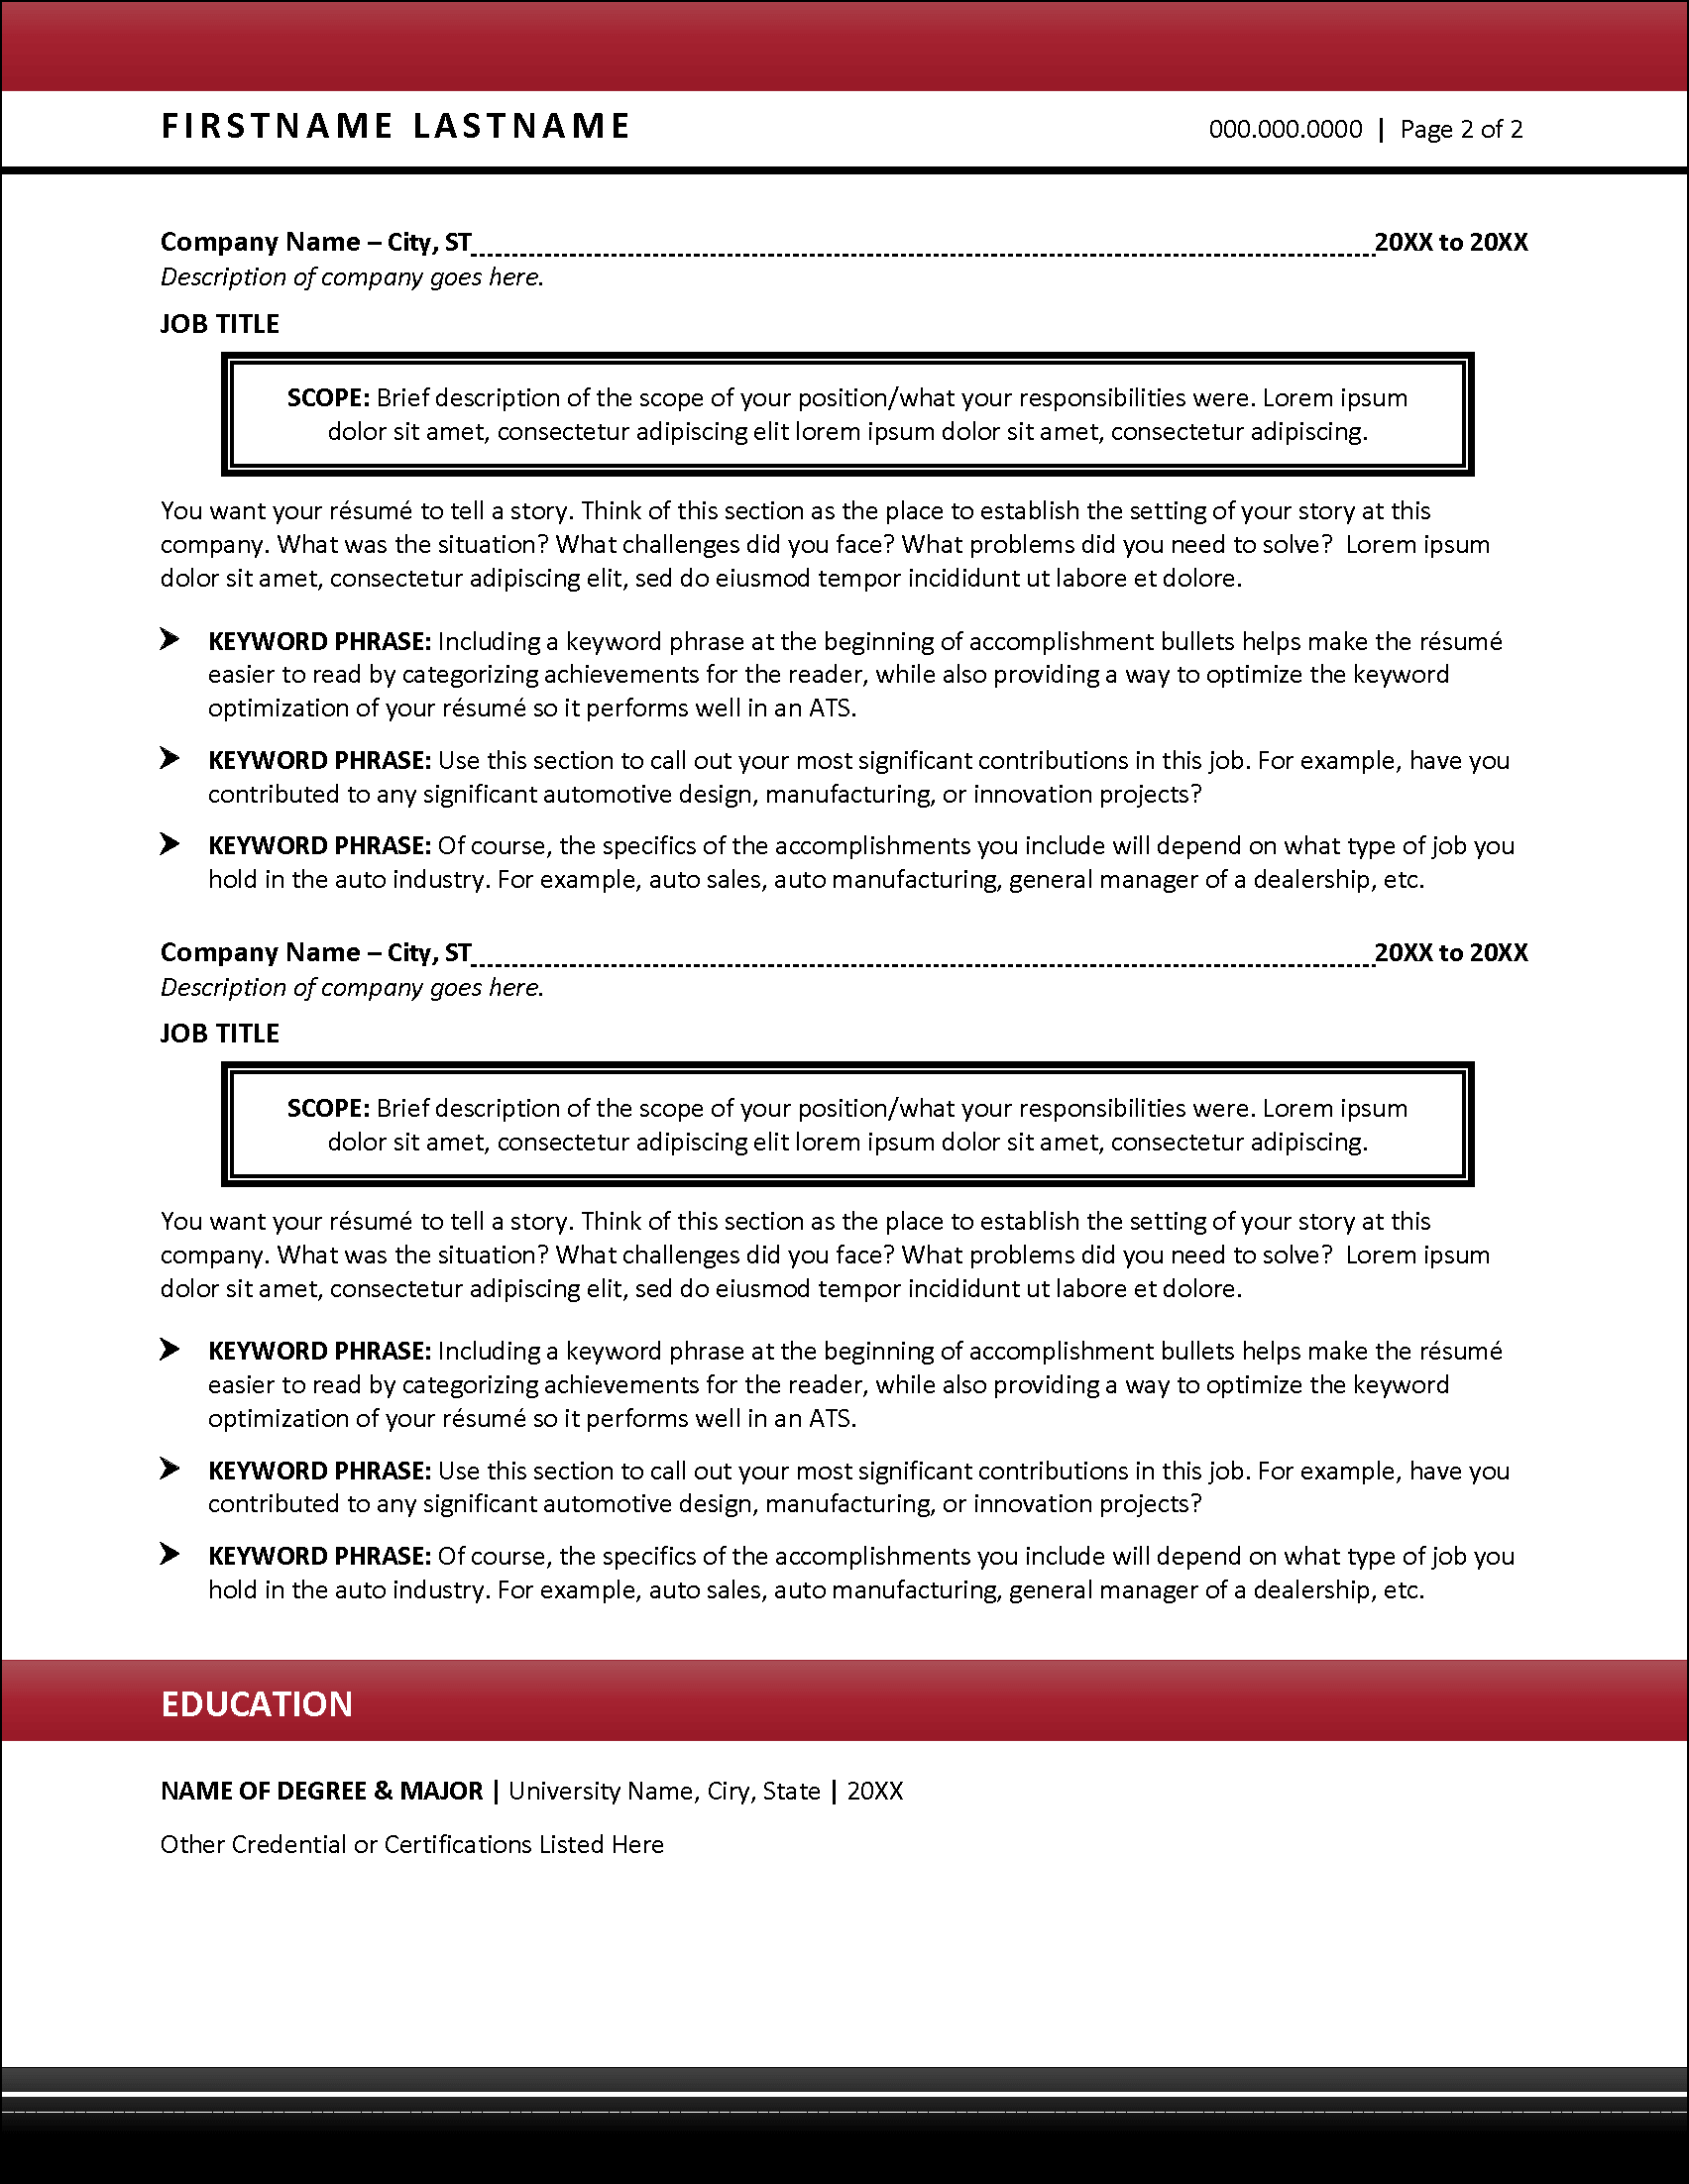 Automotive Industry Resume Page 2